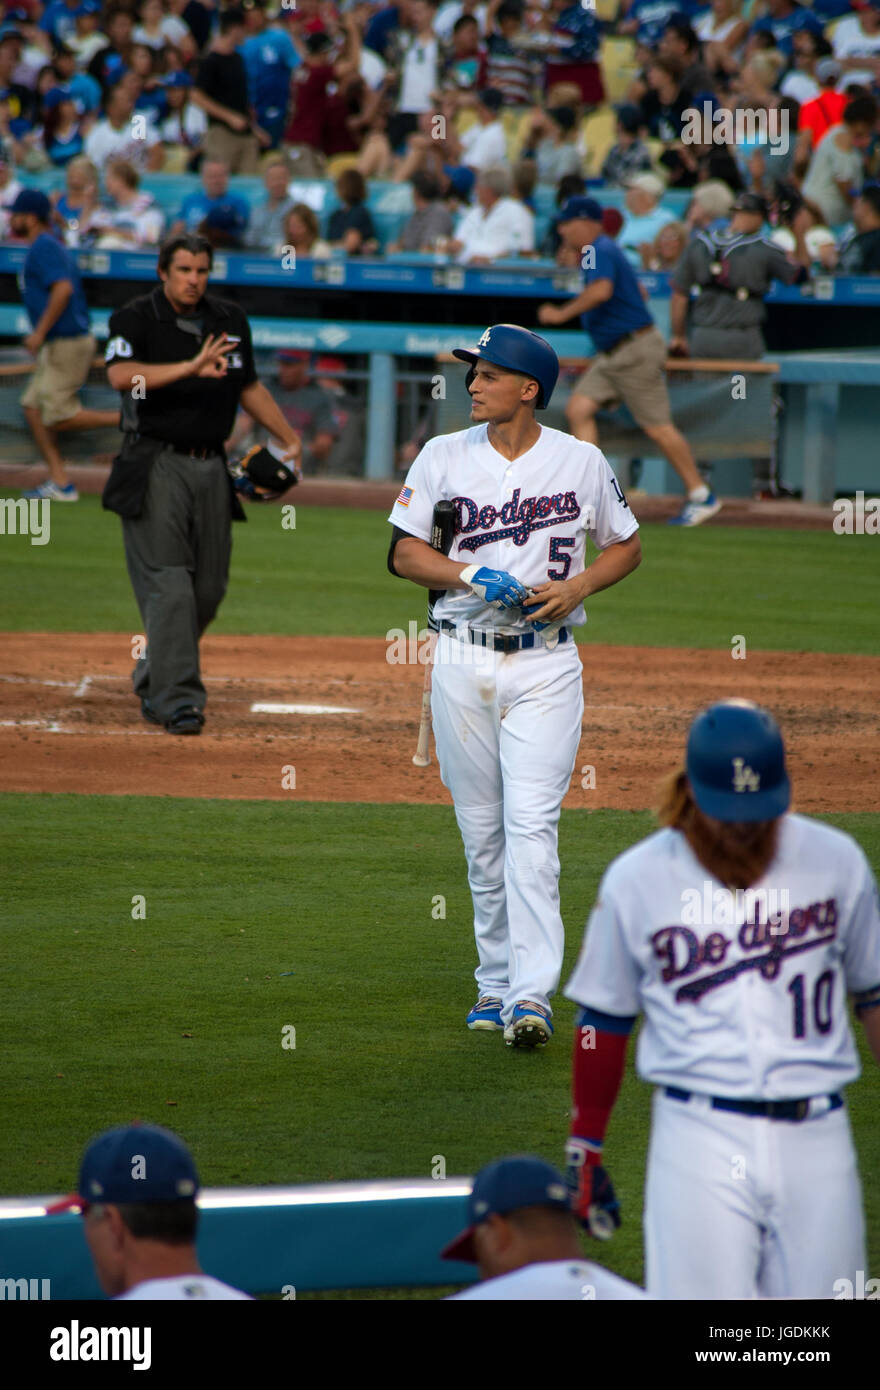 Dodger star player Corey Seager heads back to the dugout after